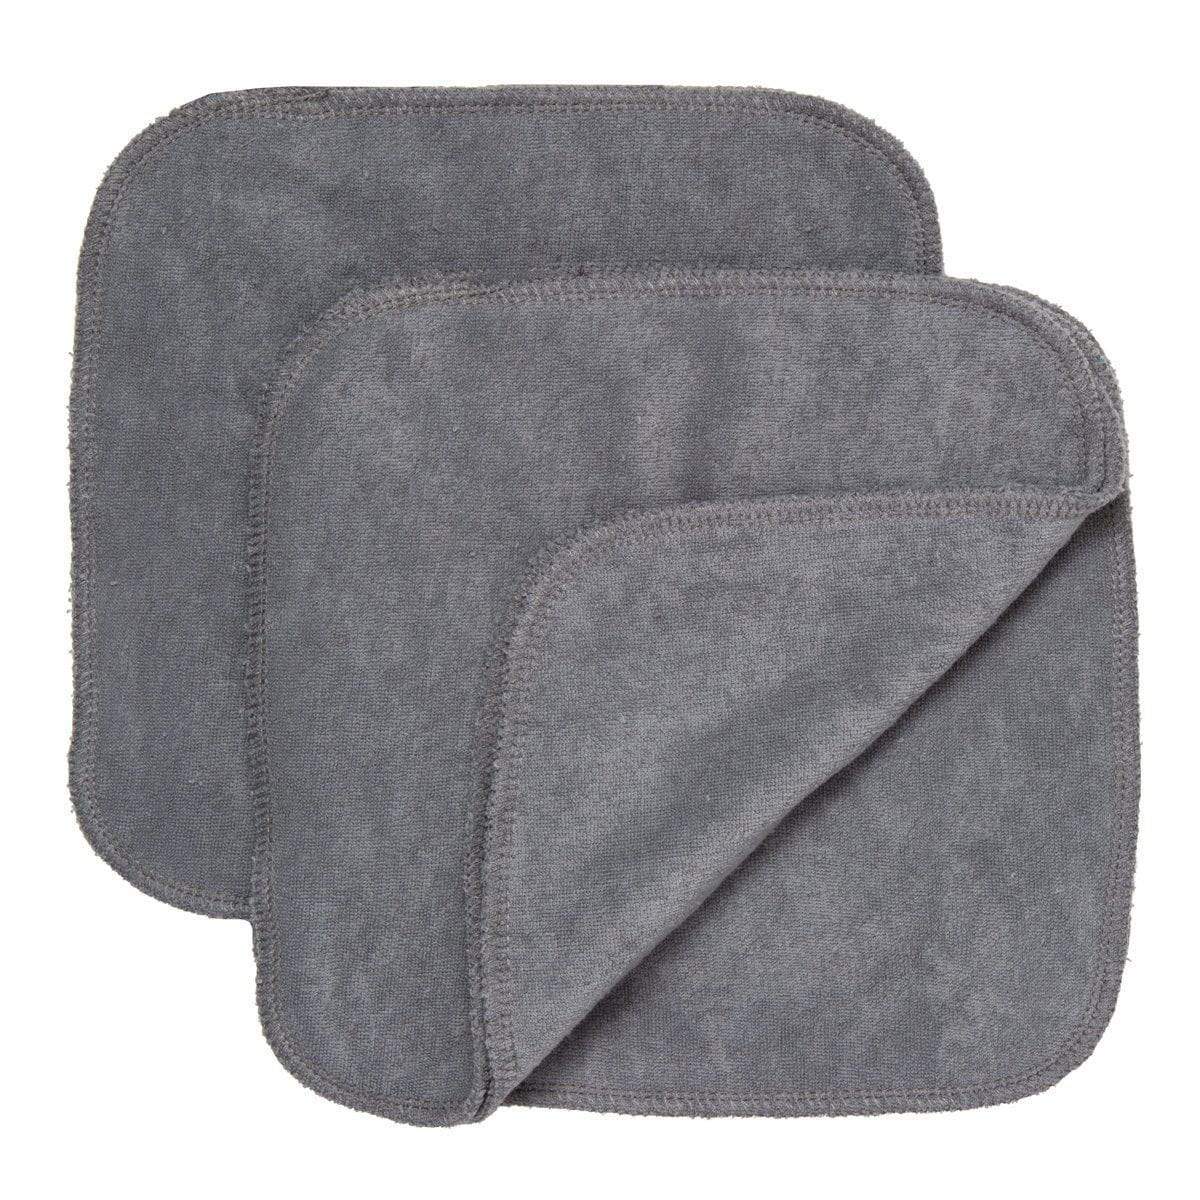 Accessories Reusable Cloth Wipes - Cloud